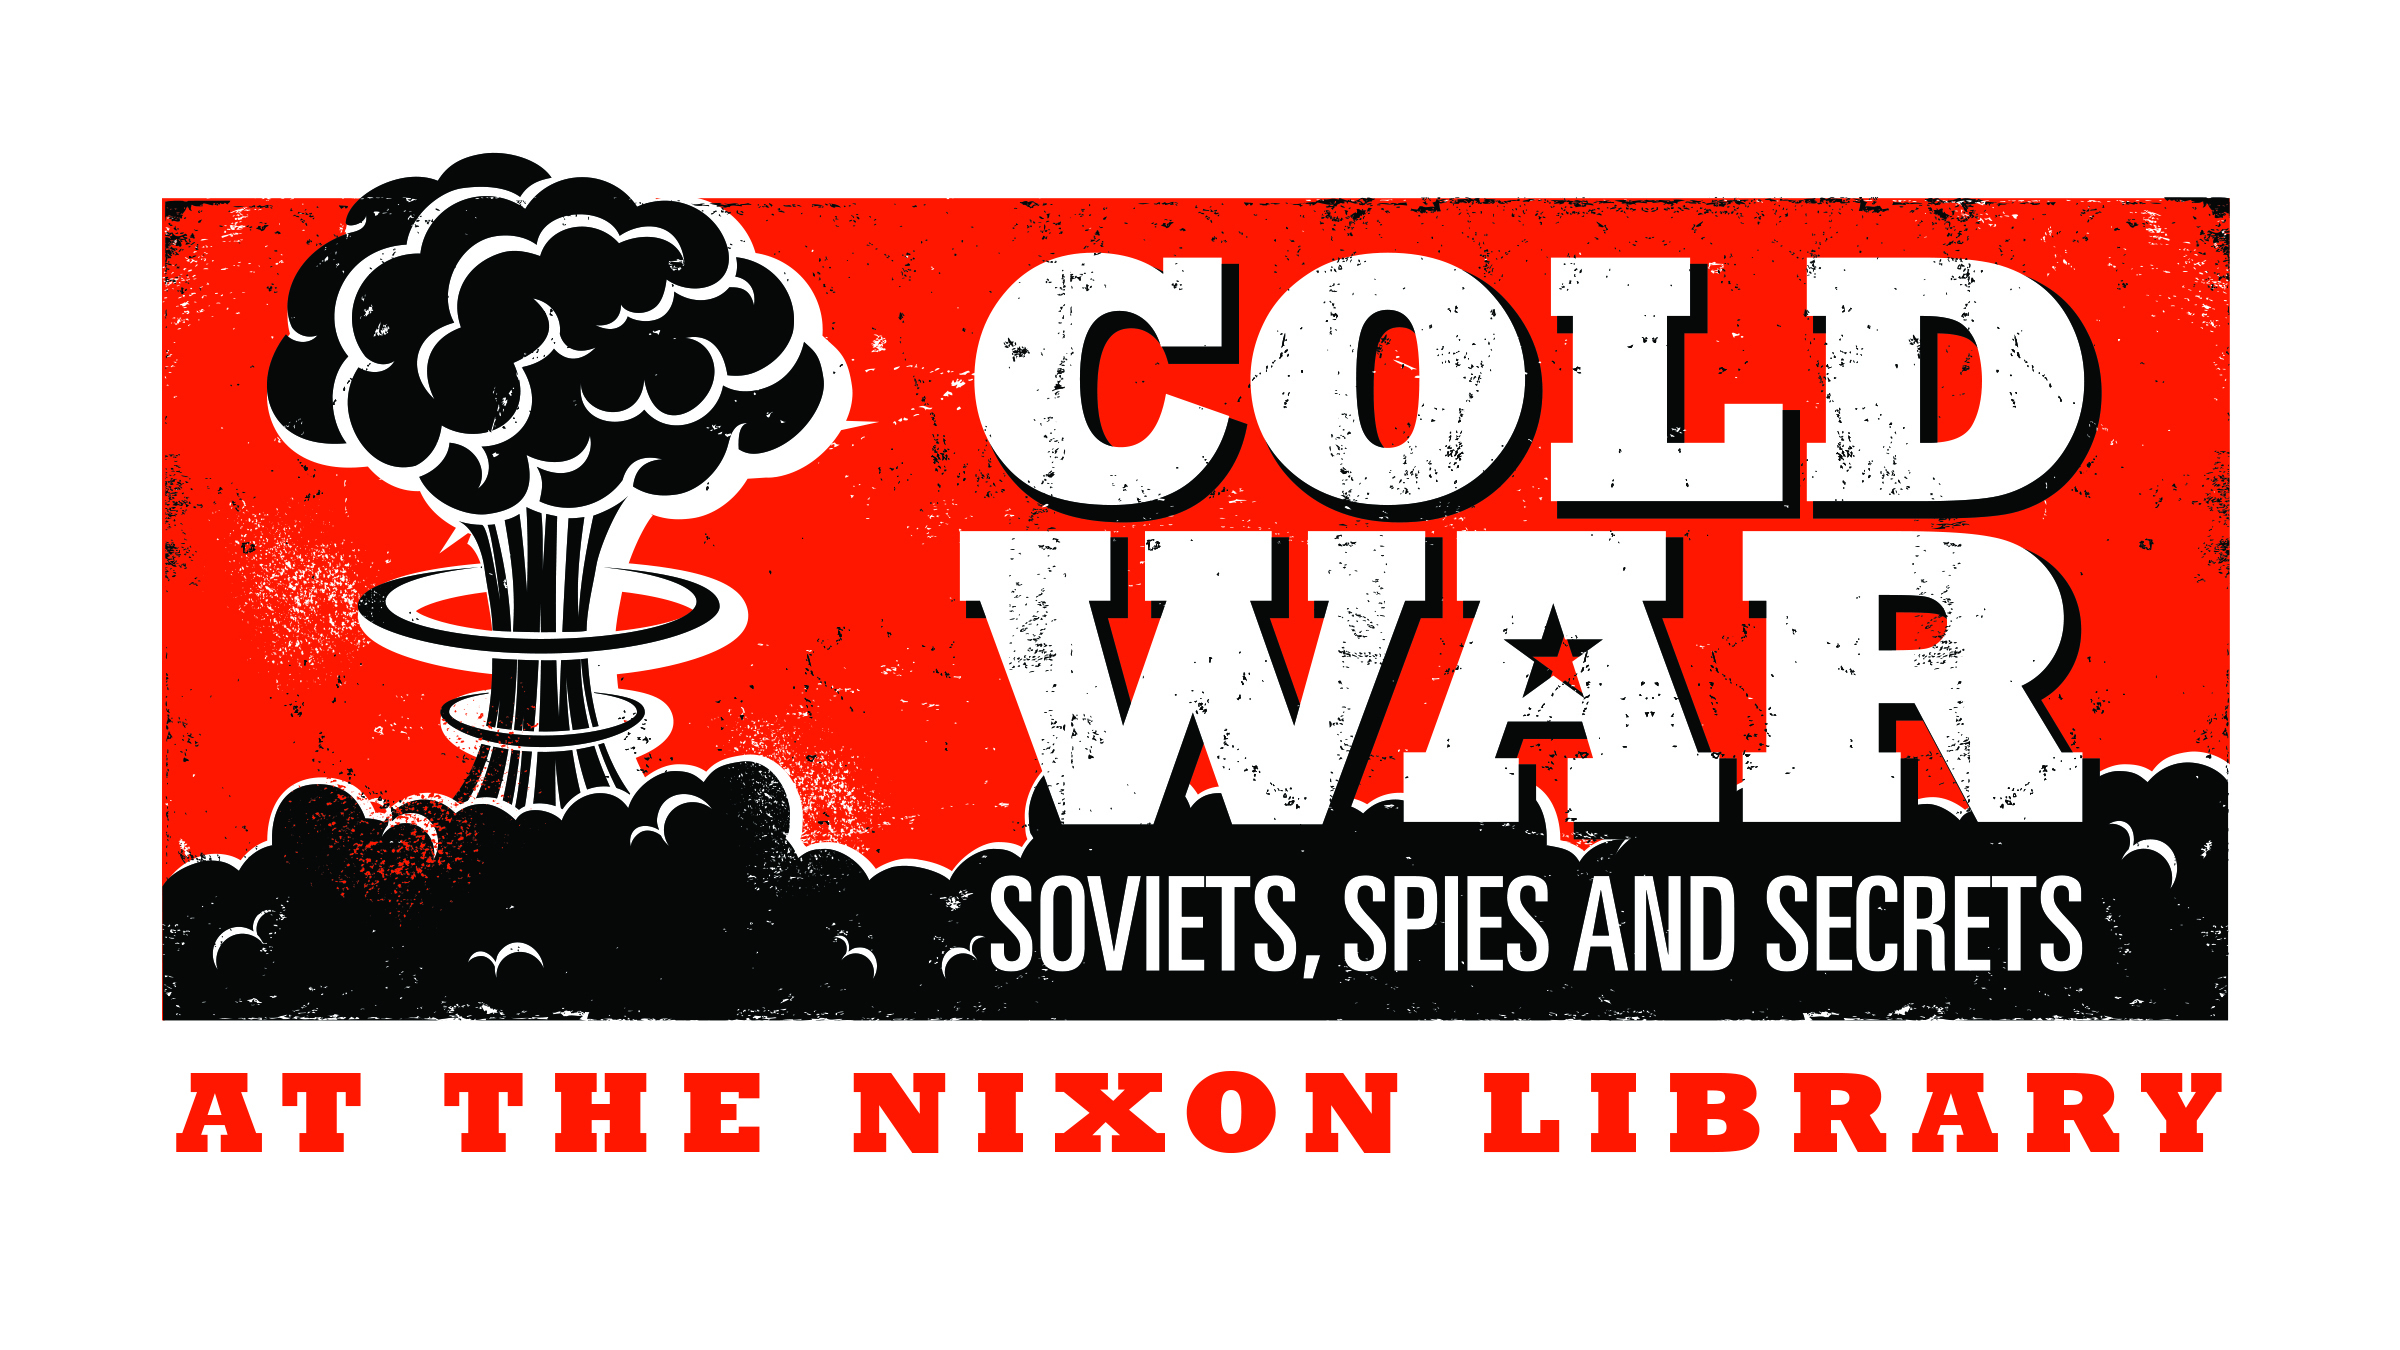 Cold War Exhibit: Soviets, Spies, and Secrets